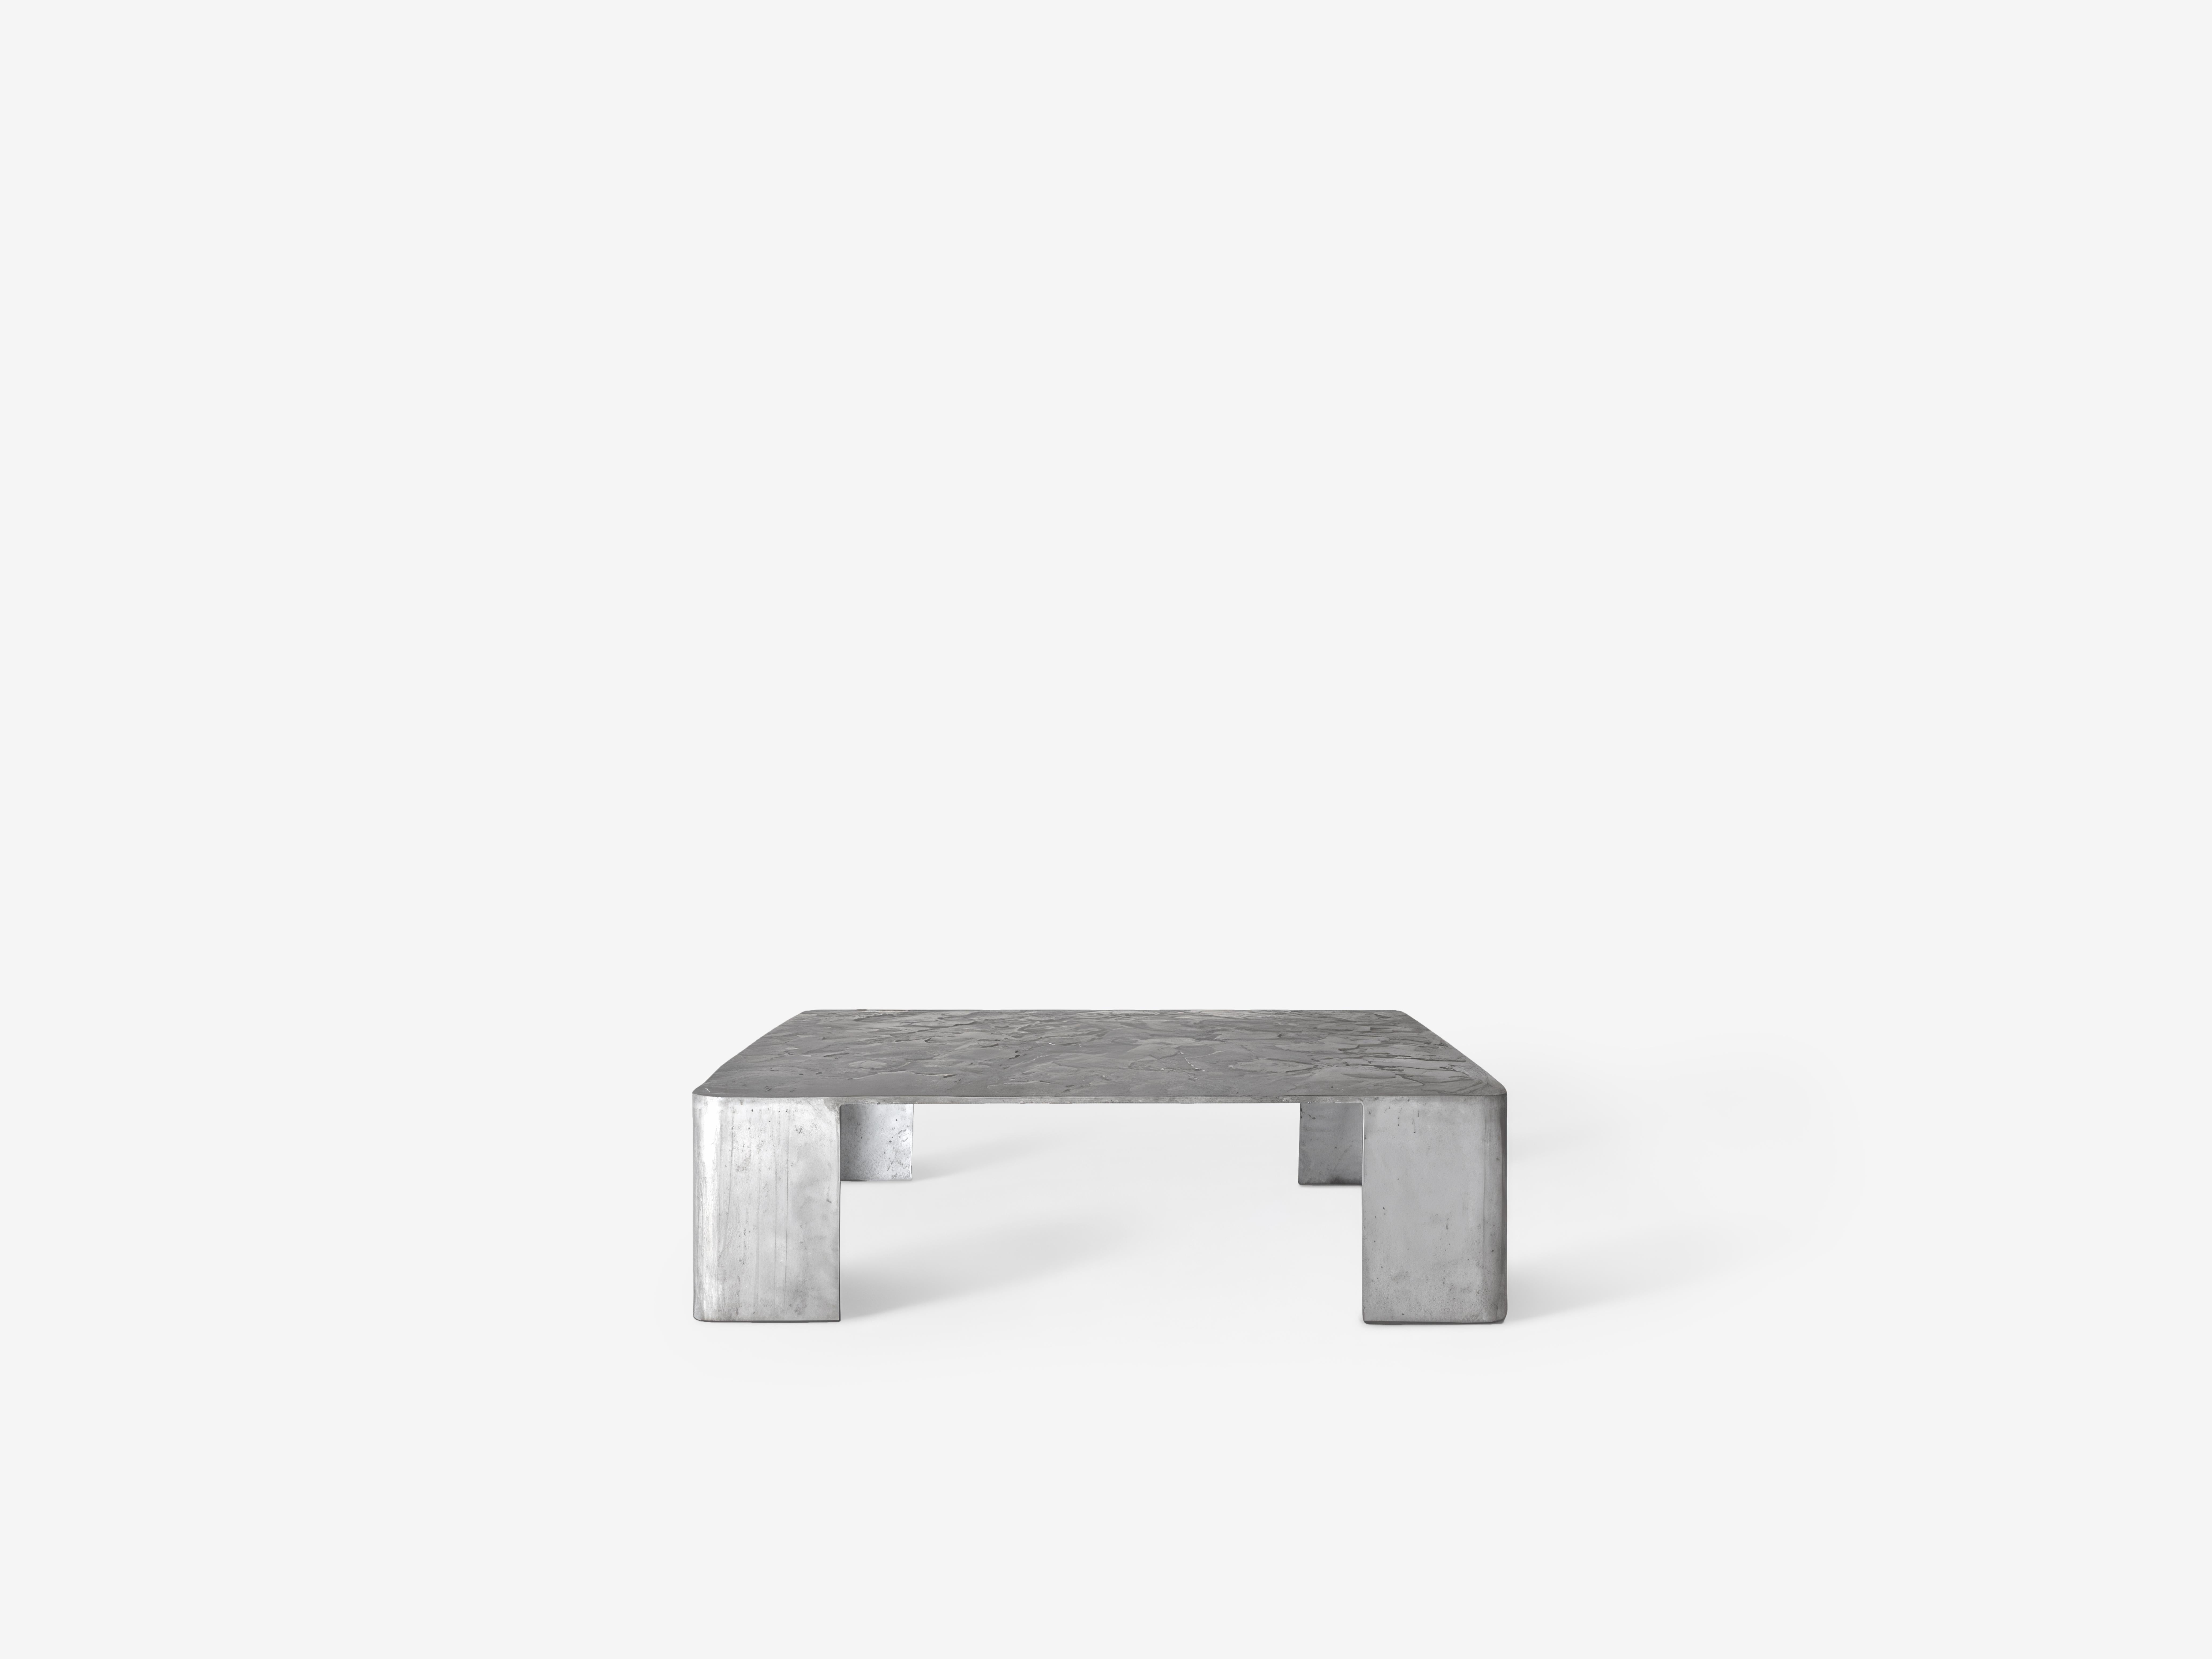 Paulín Coffee Table by OHLA STUDIO
Dimensions: D 110 x W 110 x H 30 cm 
Materials: Brushed Aluminum.
Weight: 48 kg

Is a series of late night conversations, dripping wax on the wood floor,
lighting up the casita on a warm summer night. A piano plays